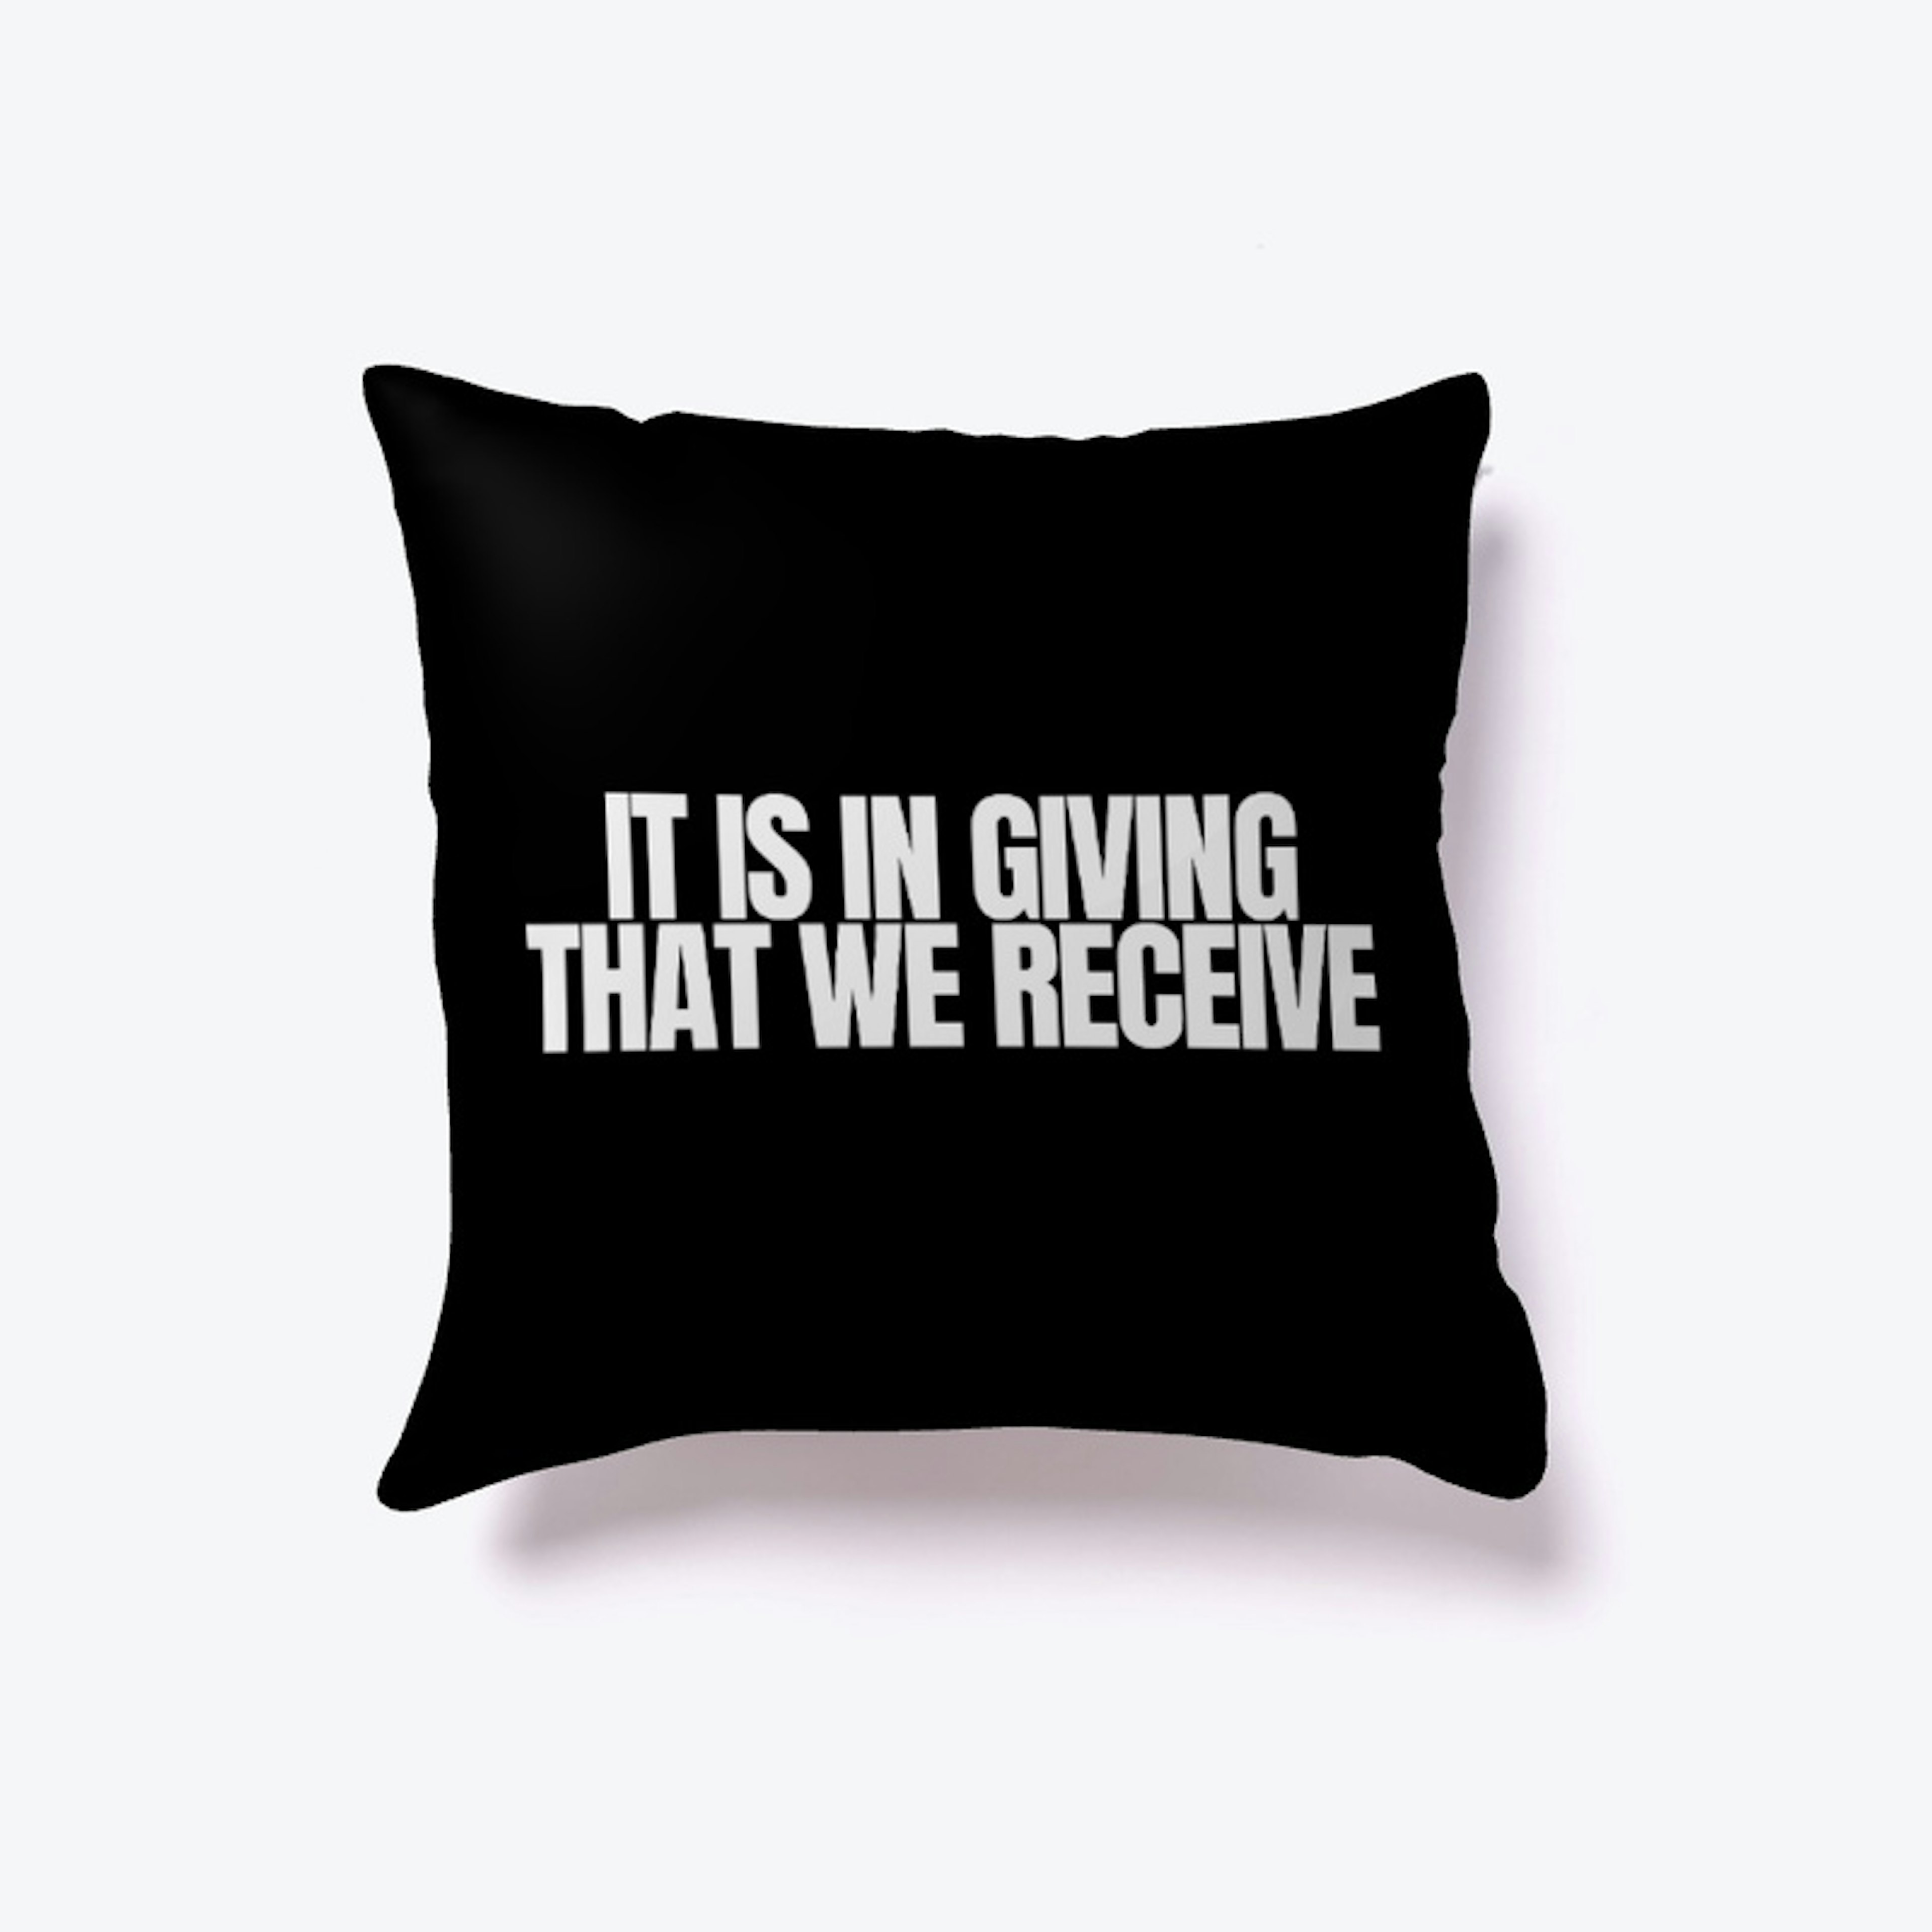 'It Is In Giving That We Receive' pillow